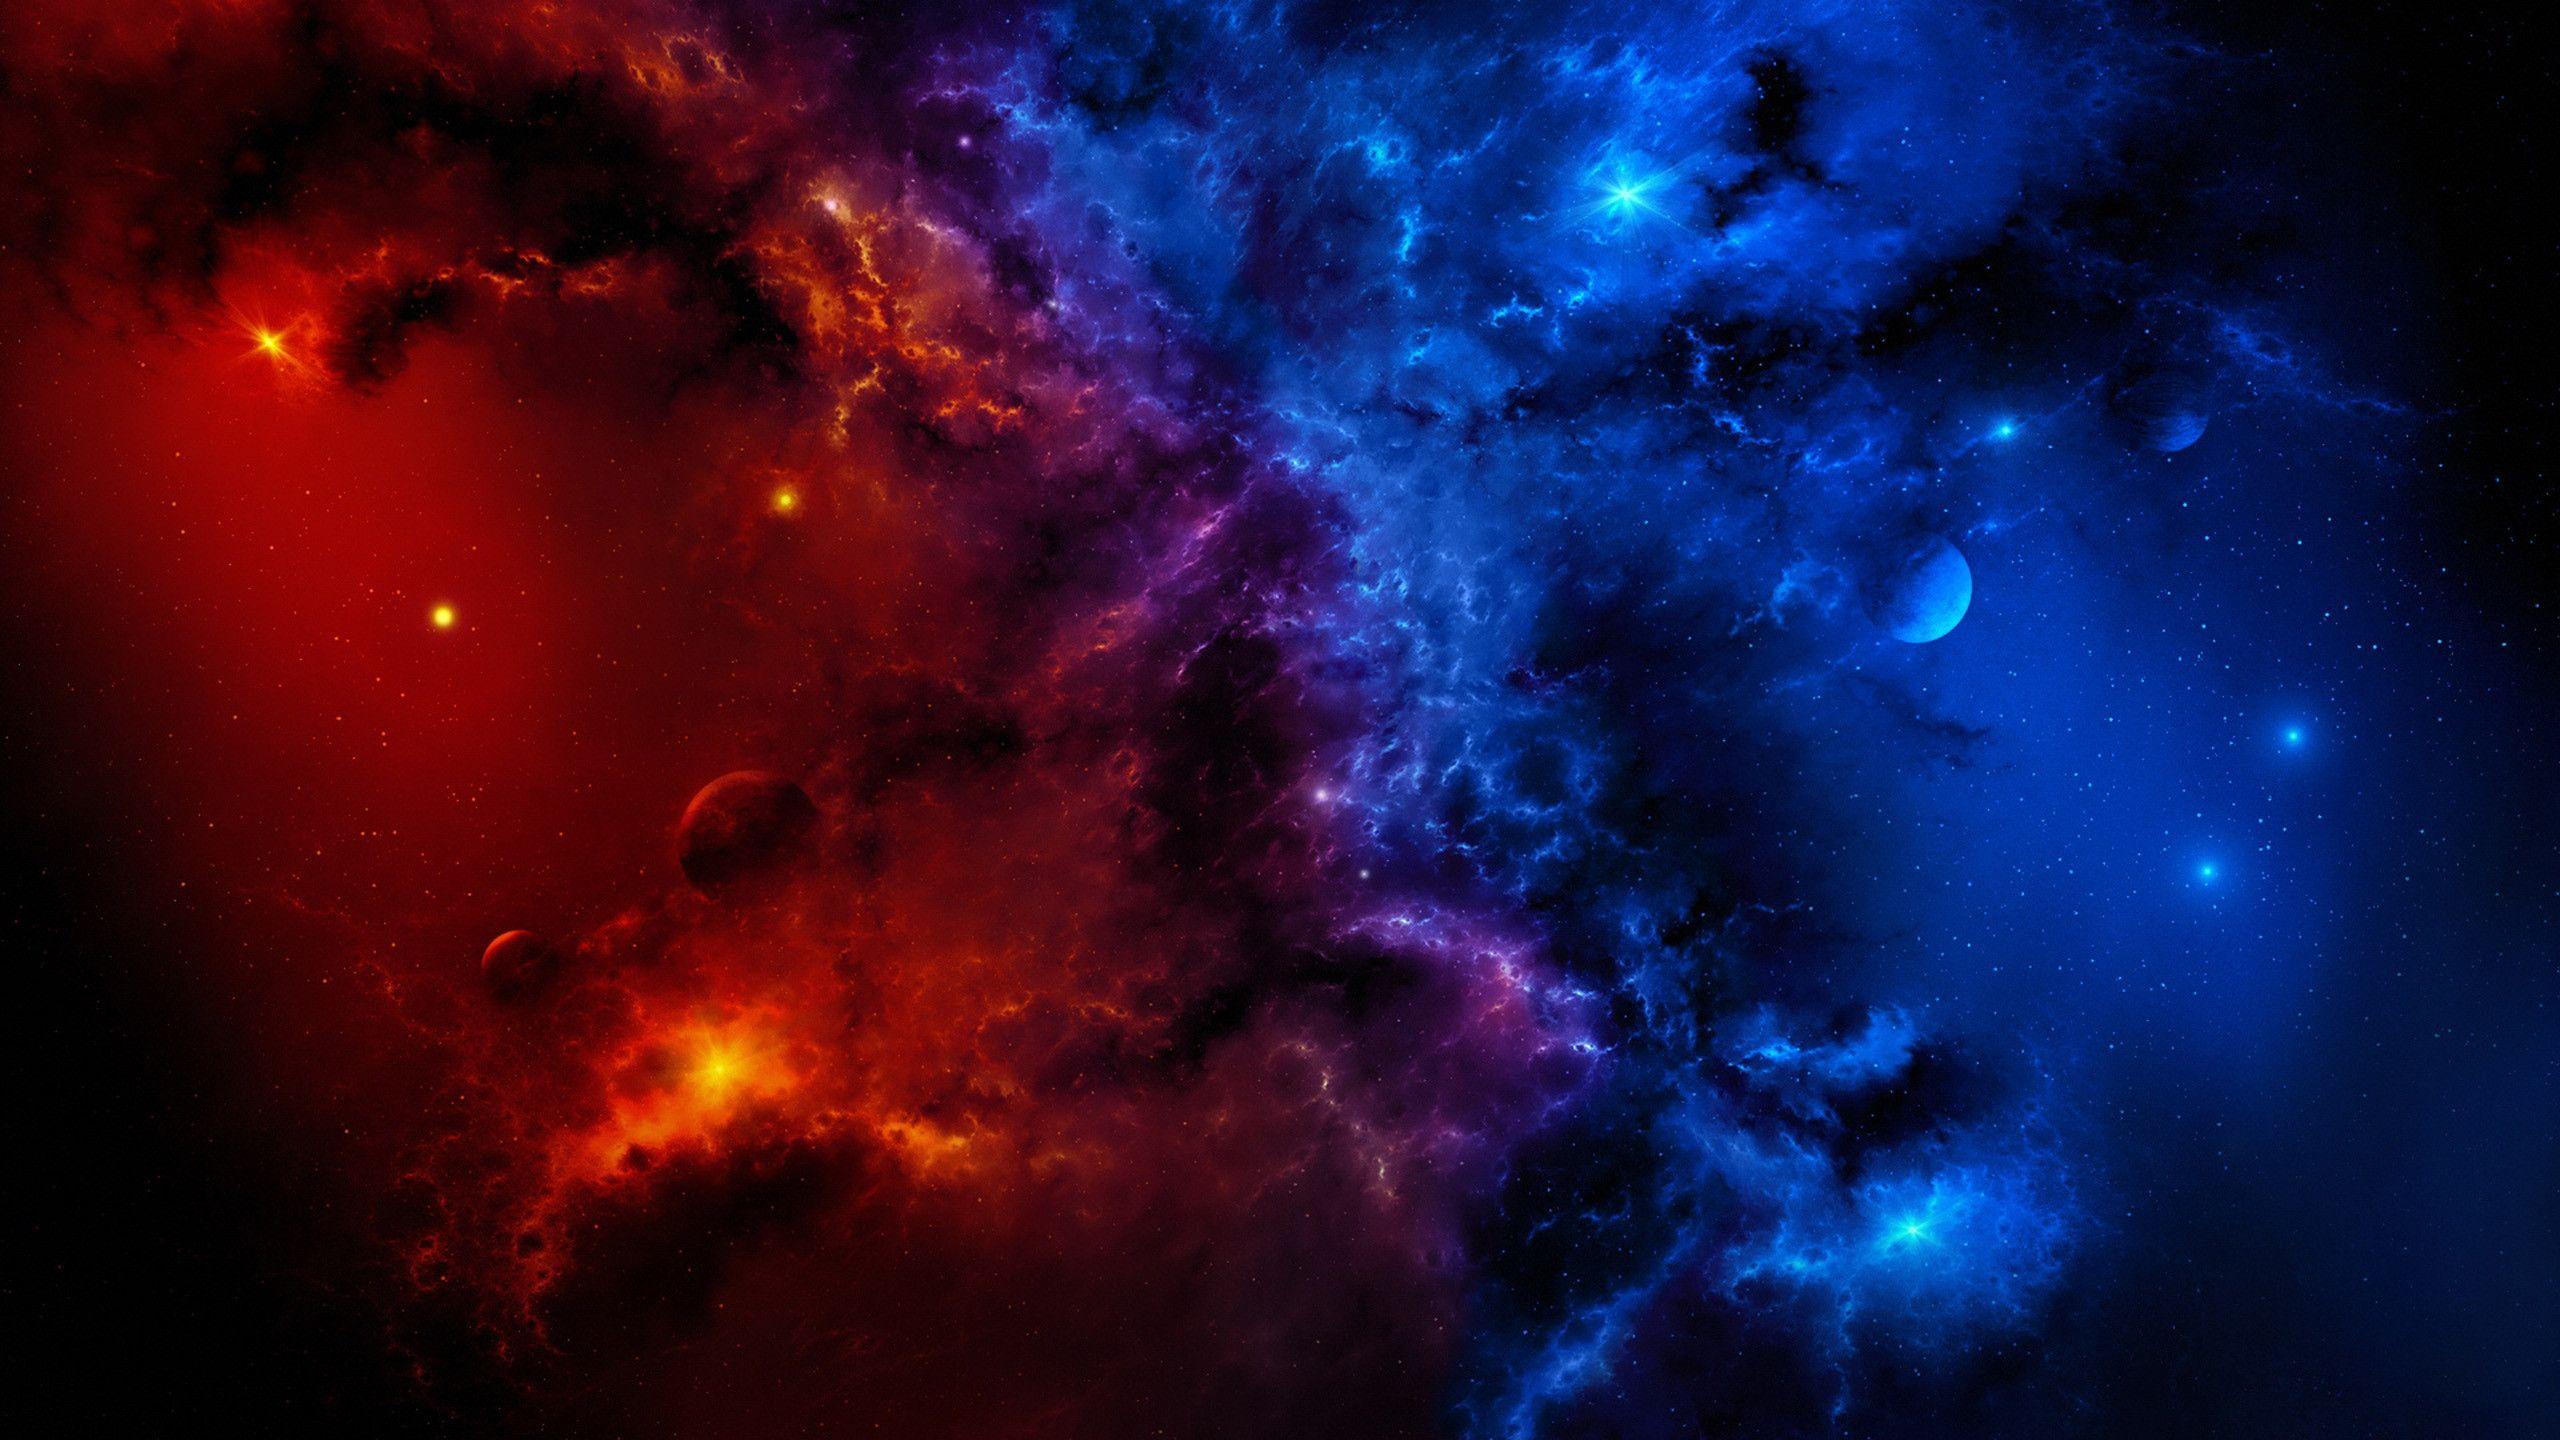 Red and Blue Galaxy Wallpapers - Top Free Red and Blue ...